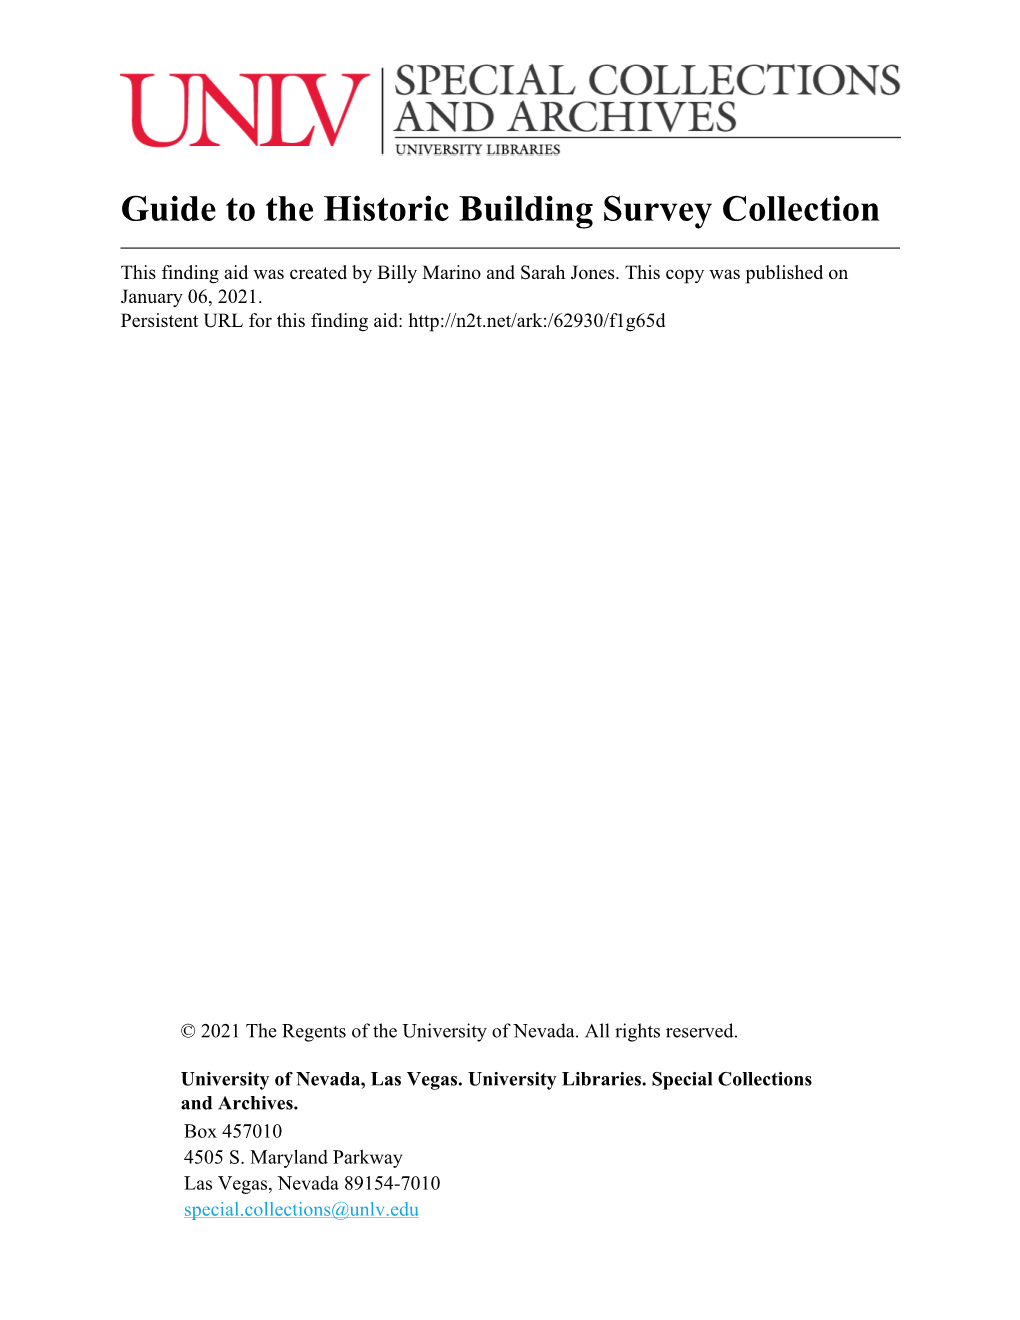 Guide to the Historic Building Survey Collection